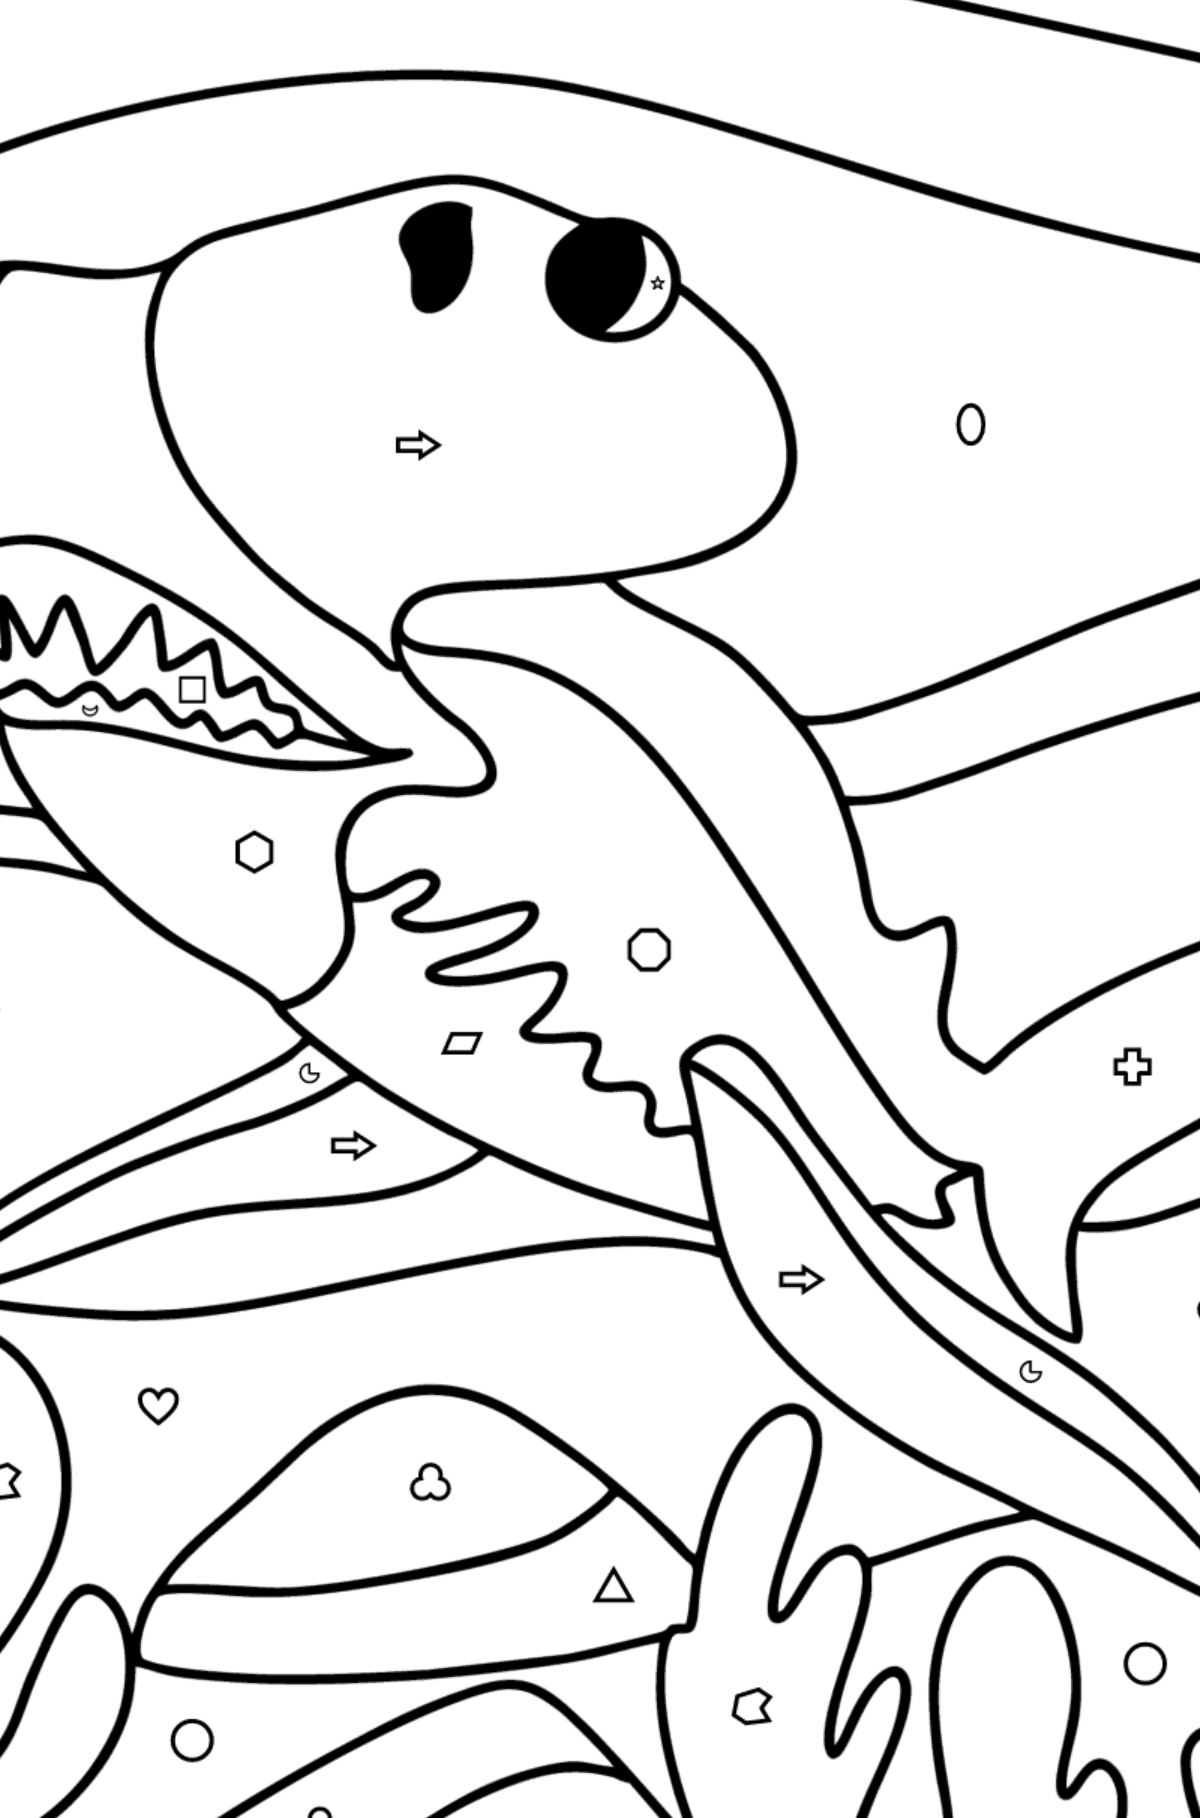 Hammerhead shark coloring page - Coloring by Geometric Shapes for Kids